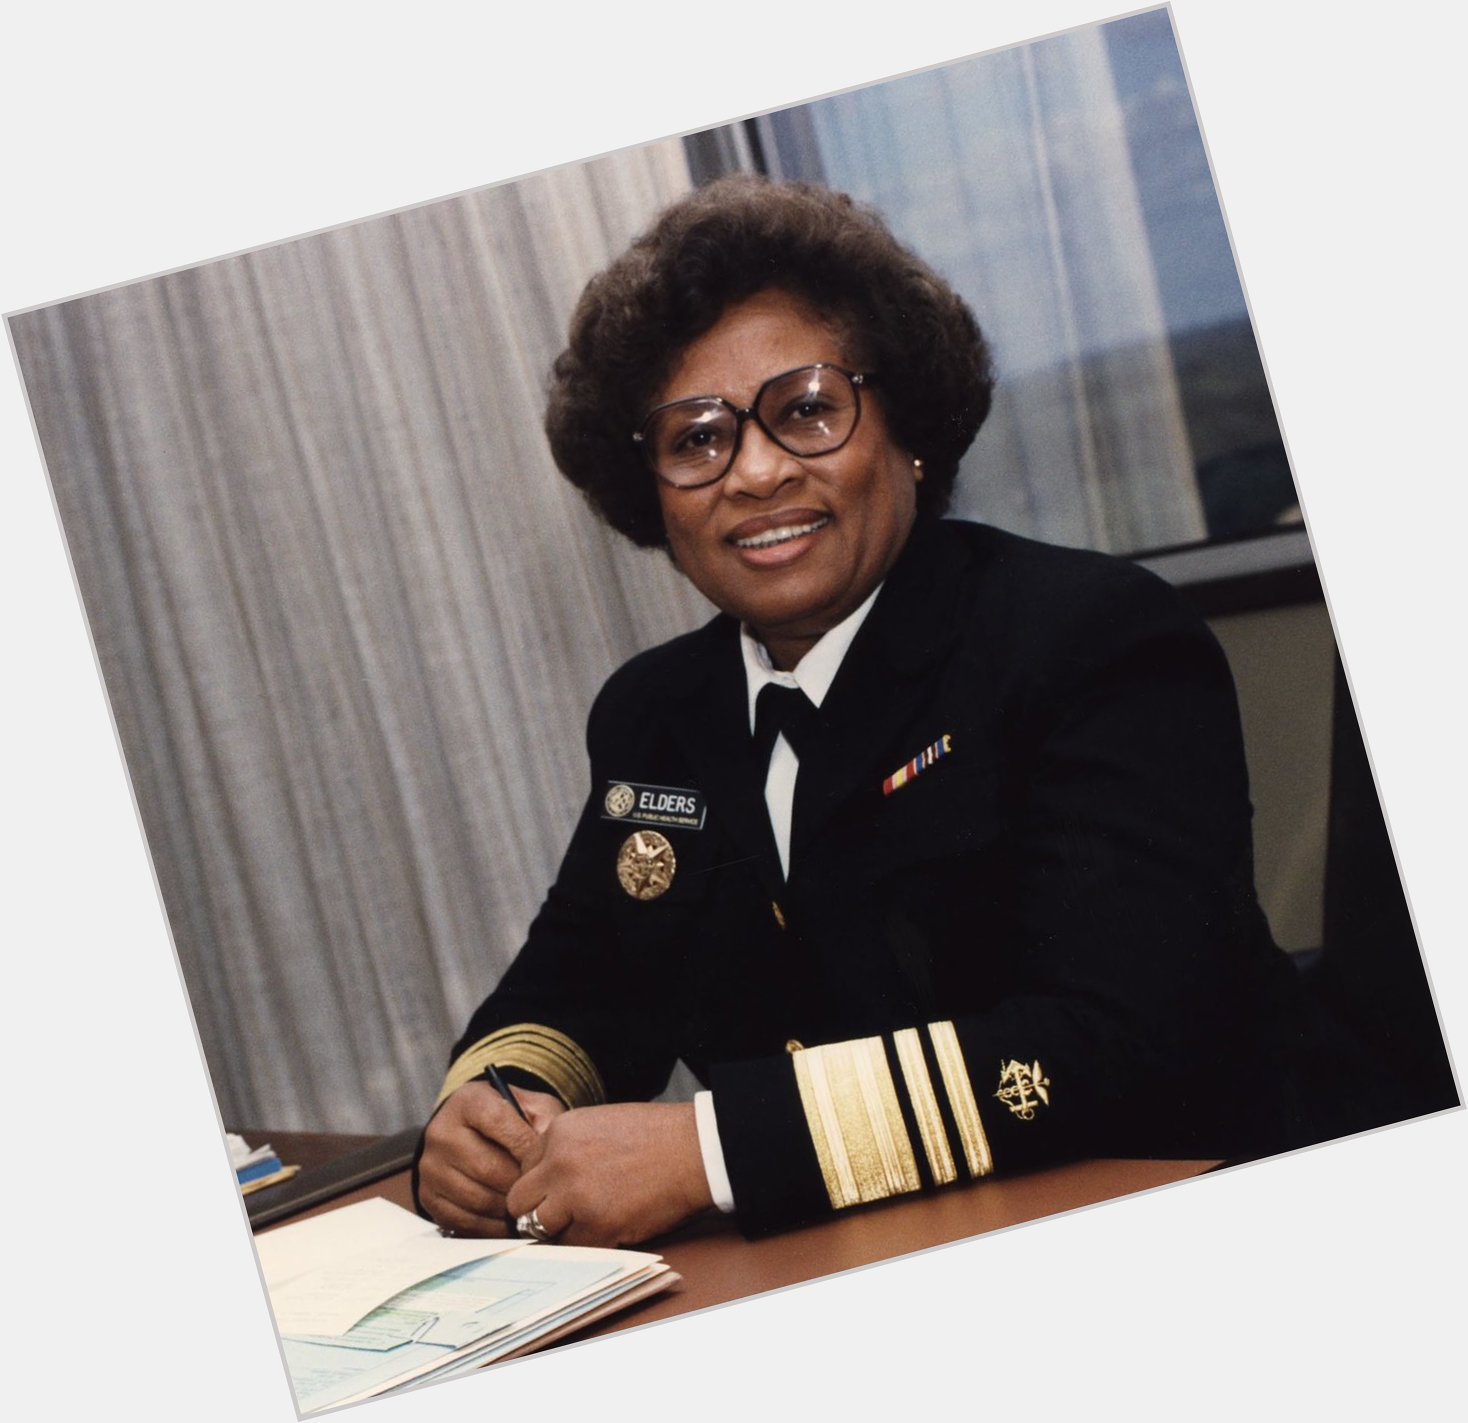 Happy Birthday Joycelyn Elders, the first Black Surgeon General of the United States. 